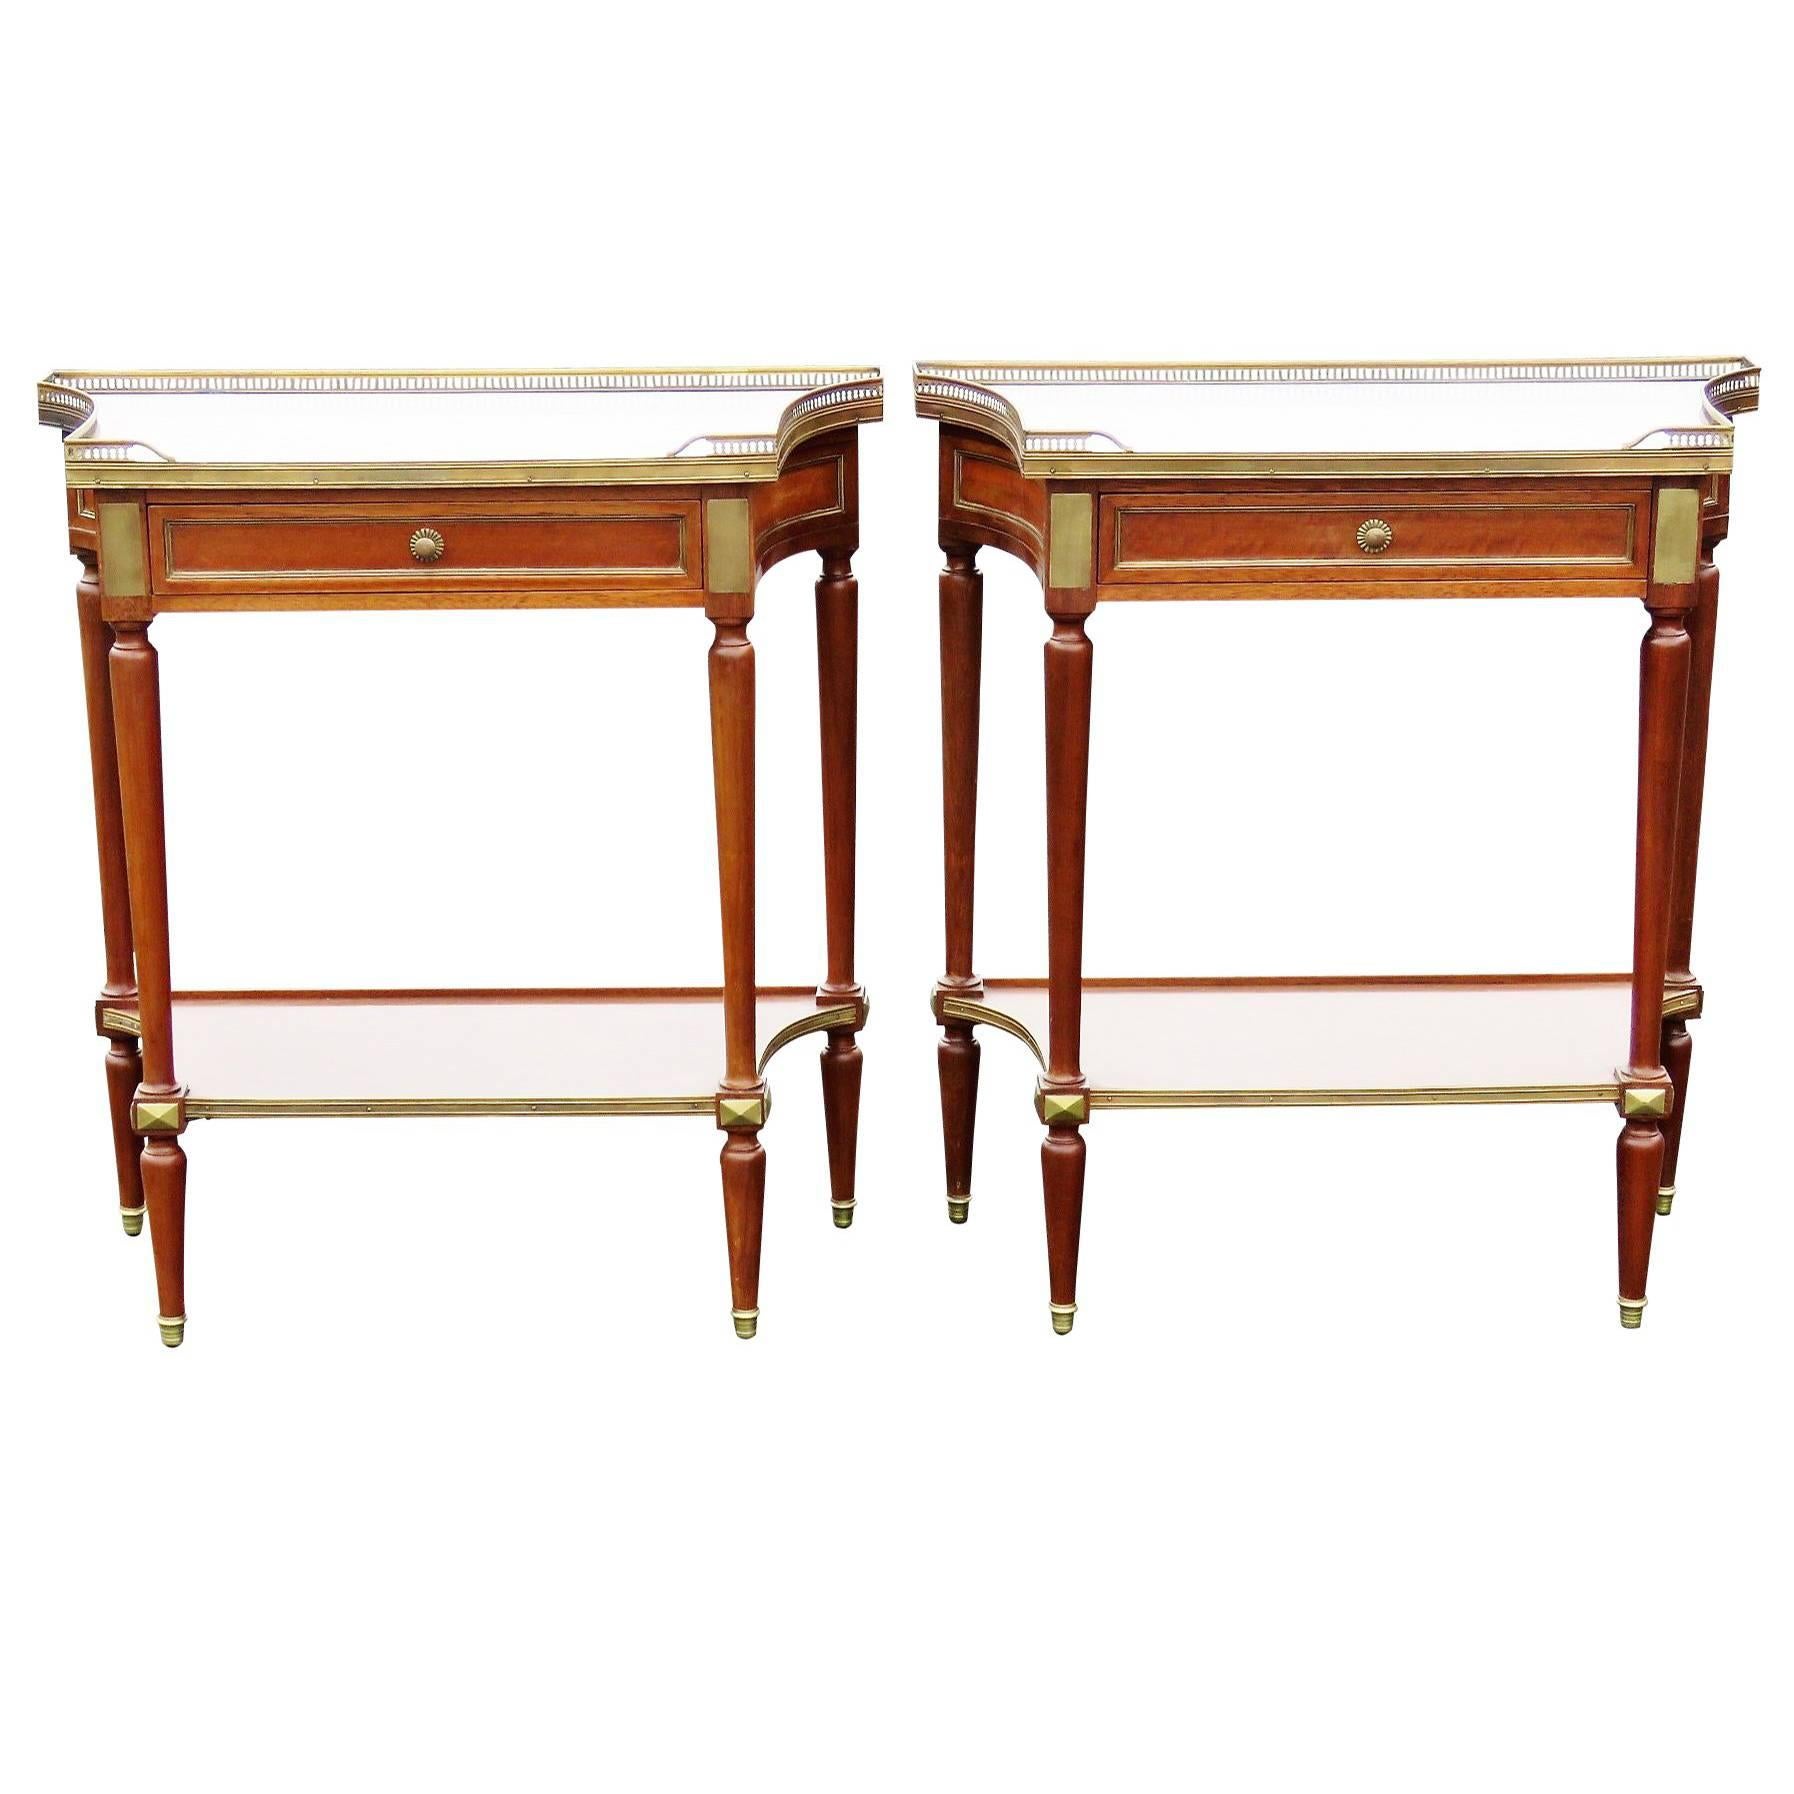 Pair of Jansen Style Marble-Top Stands